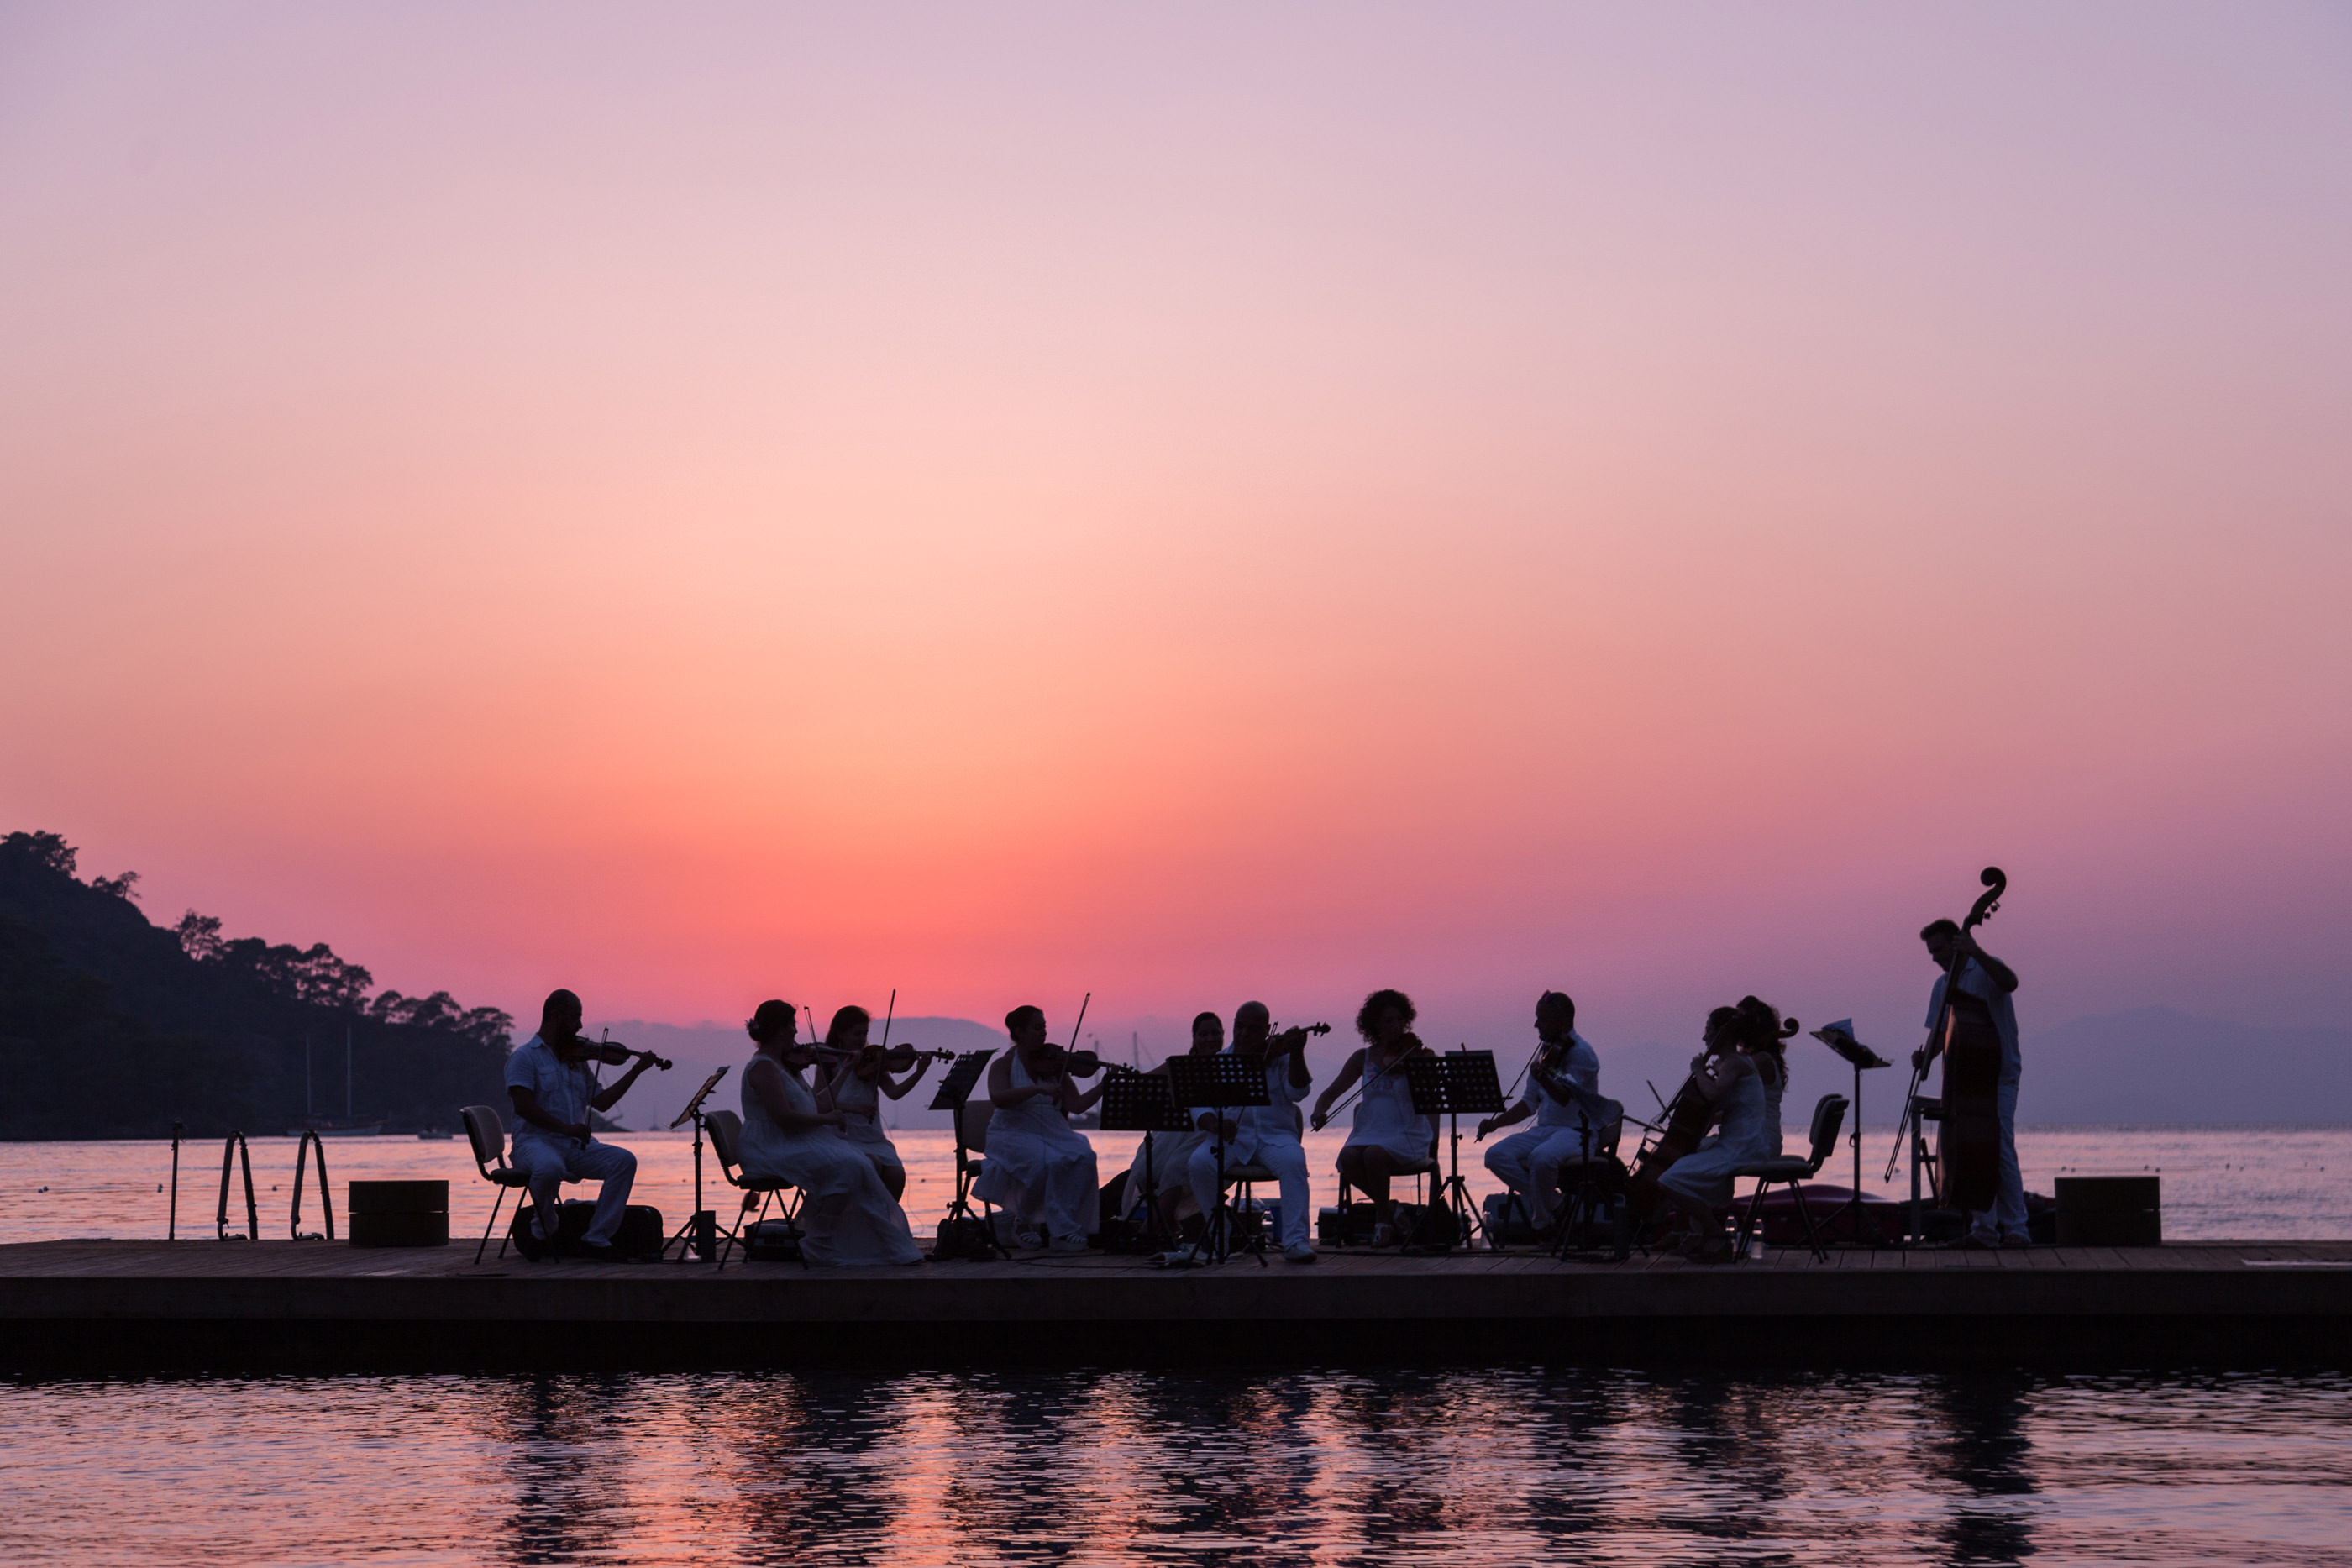 Sunset and Music Convene On The Sea